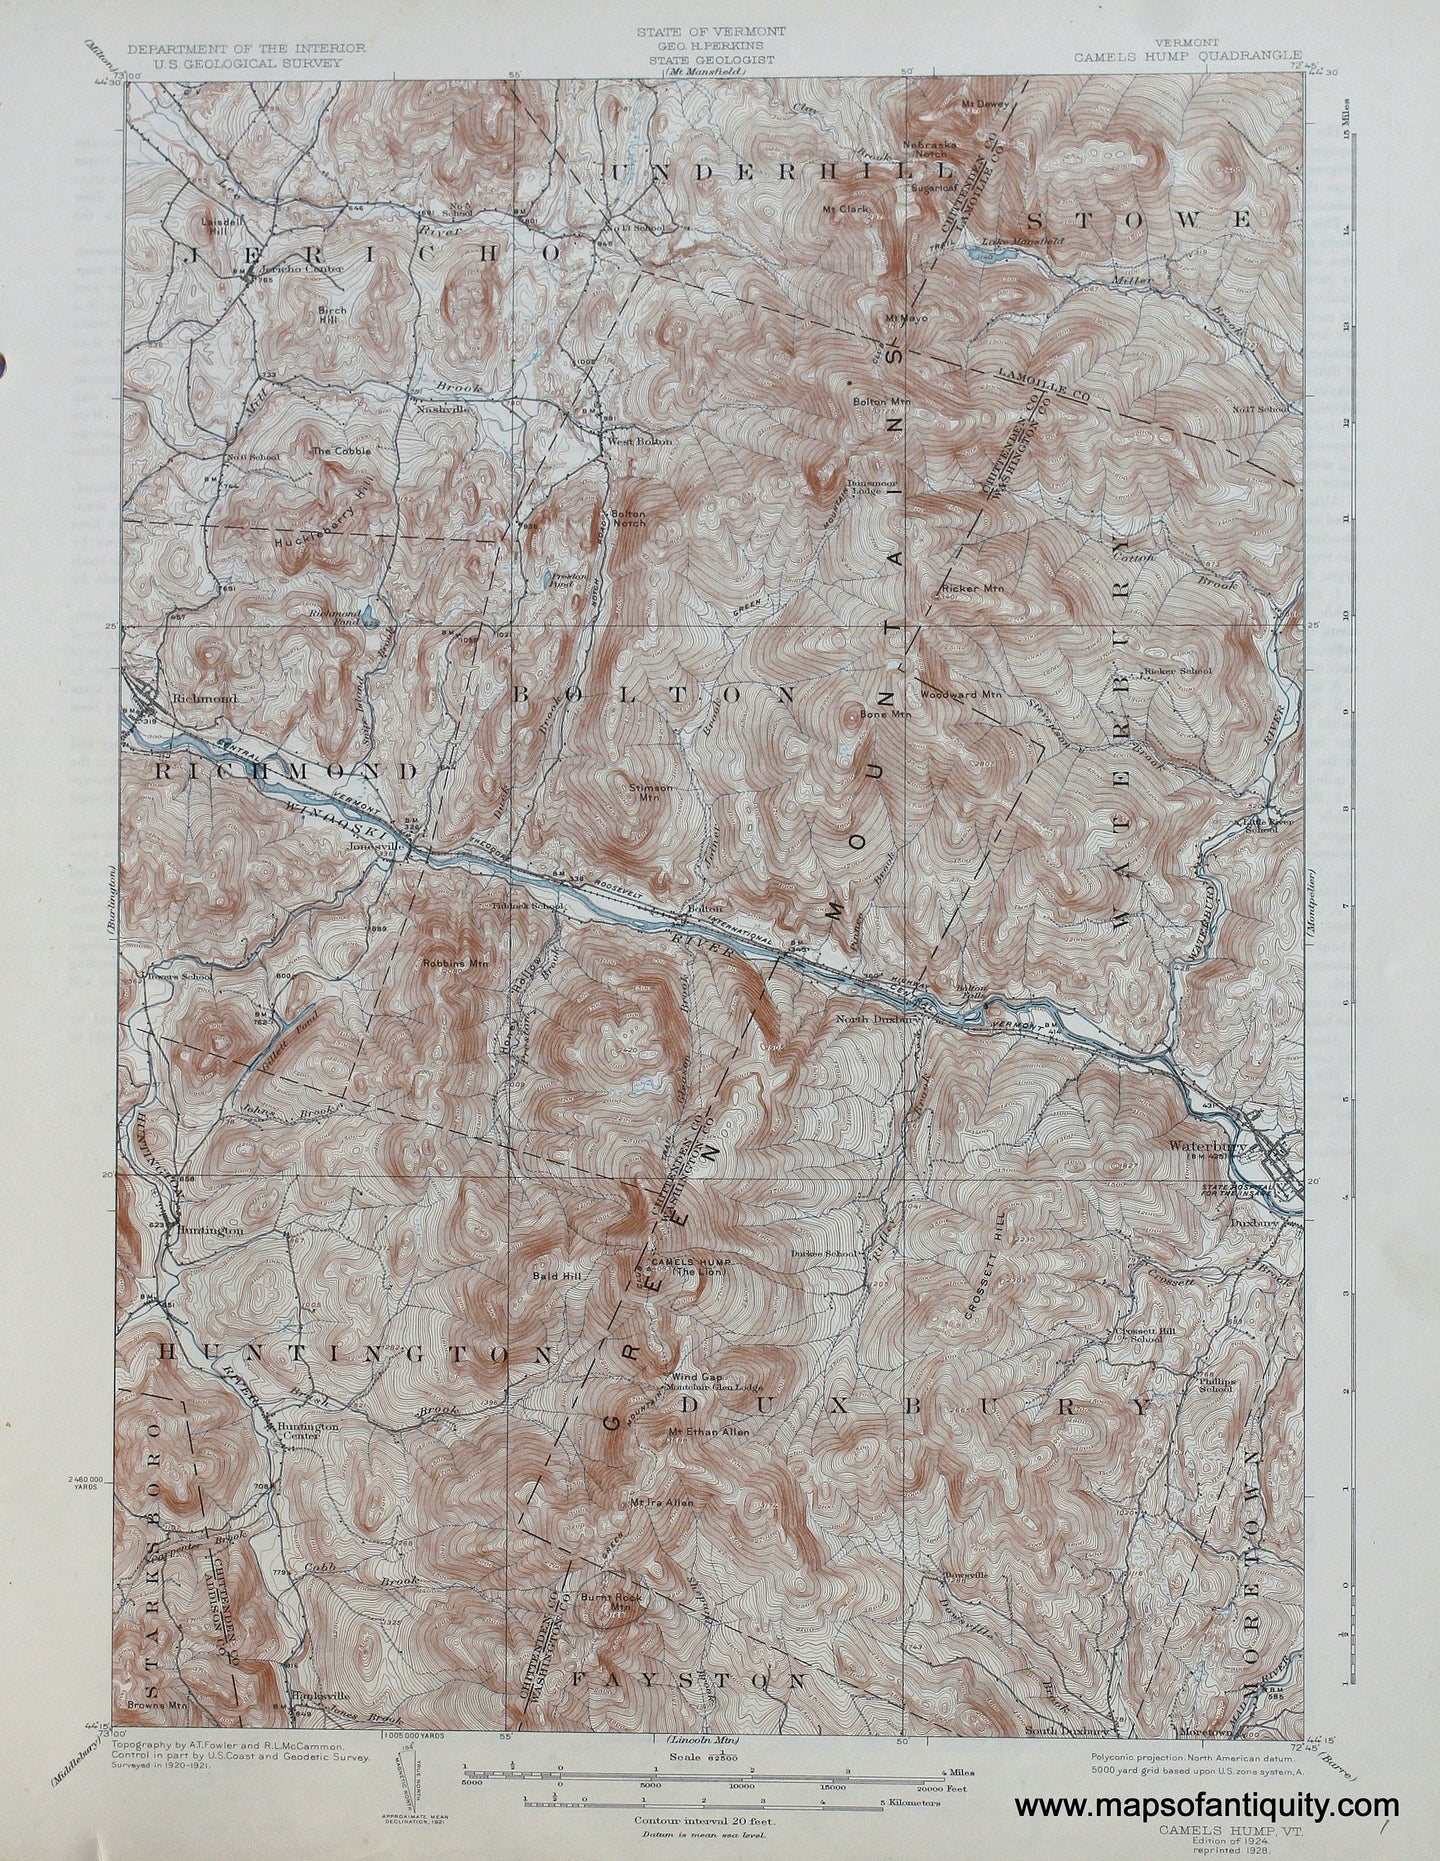 Genuine-Antique-Map-Camels-Hump-Vermont--1928-US-Geological-Survey--Maps-Of-Antiquity